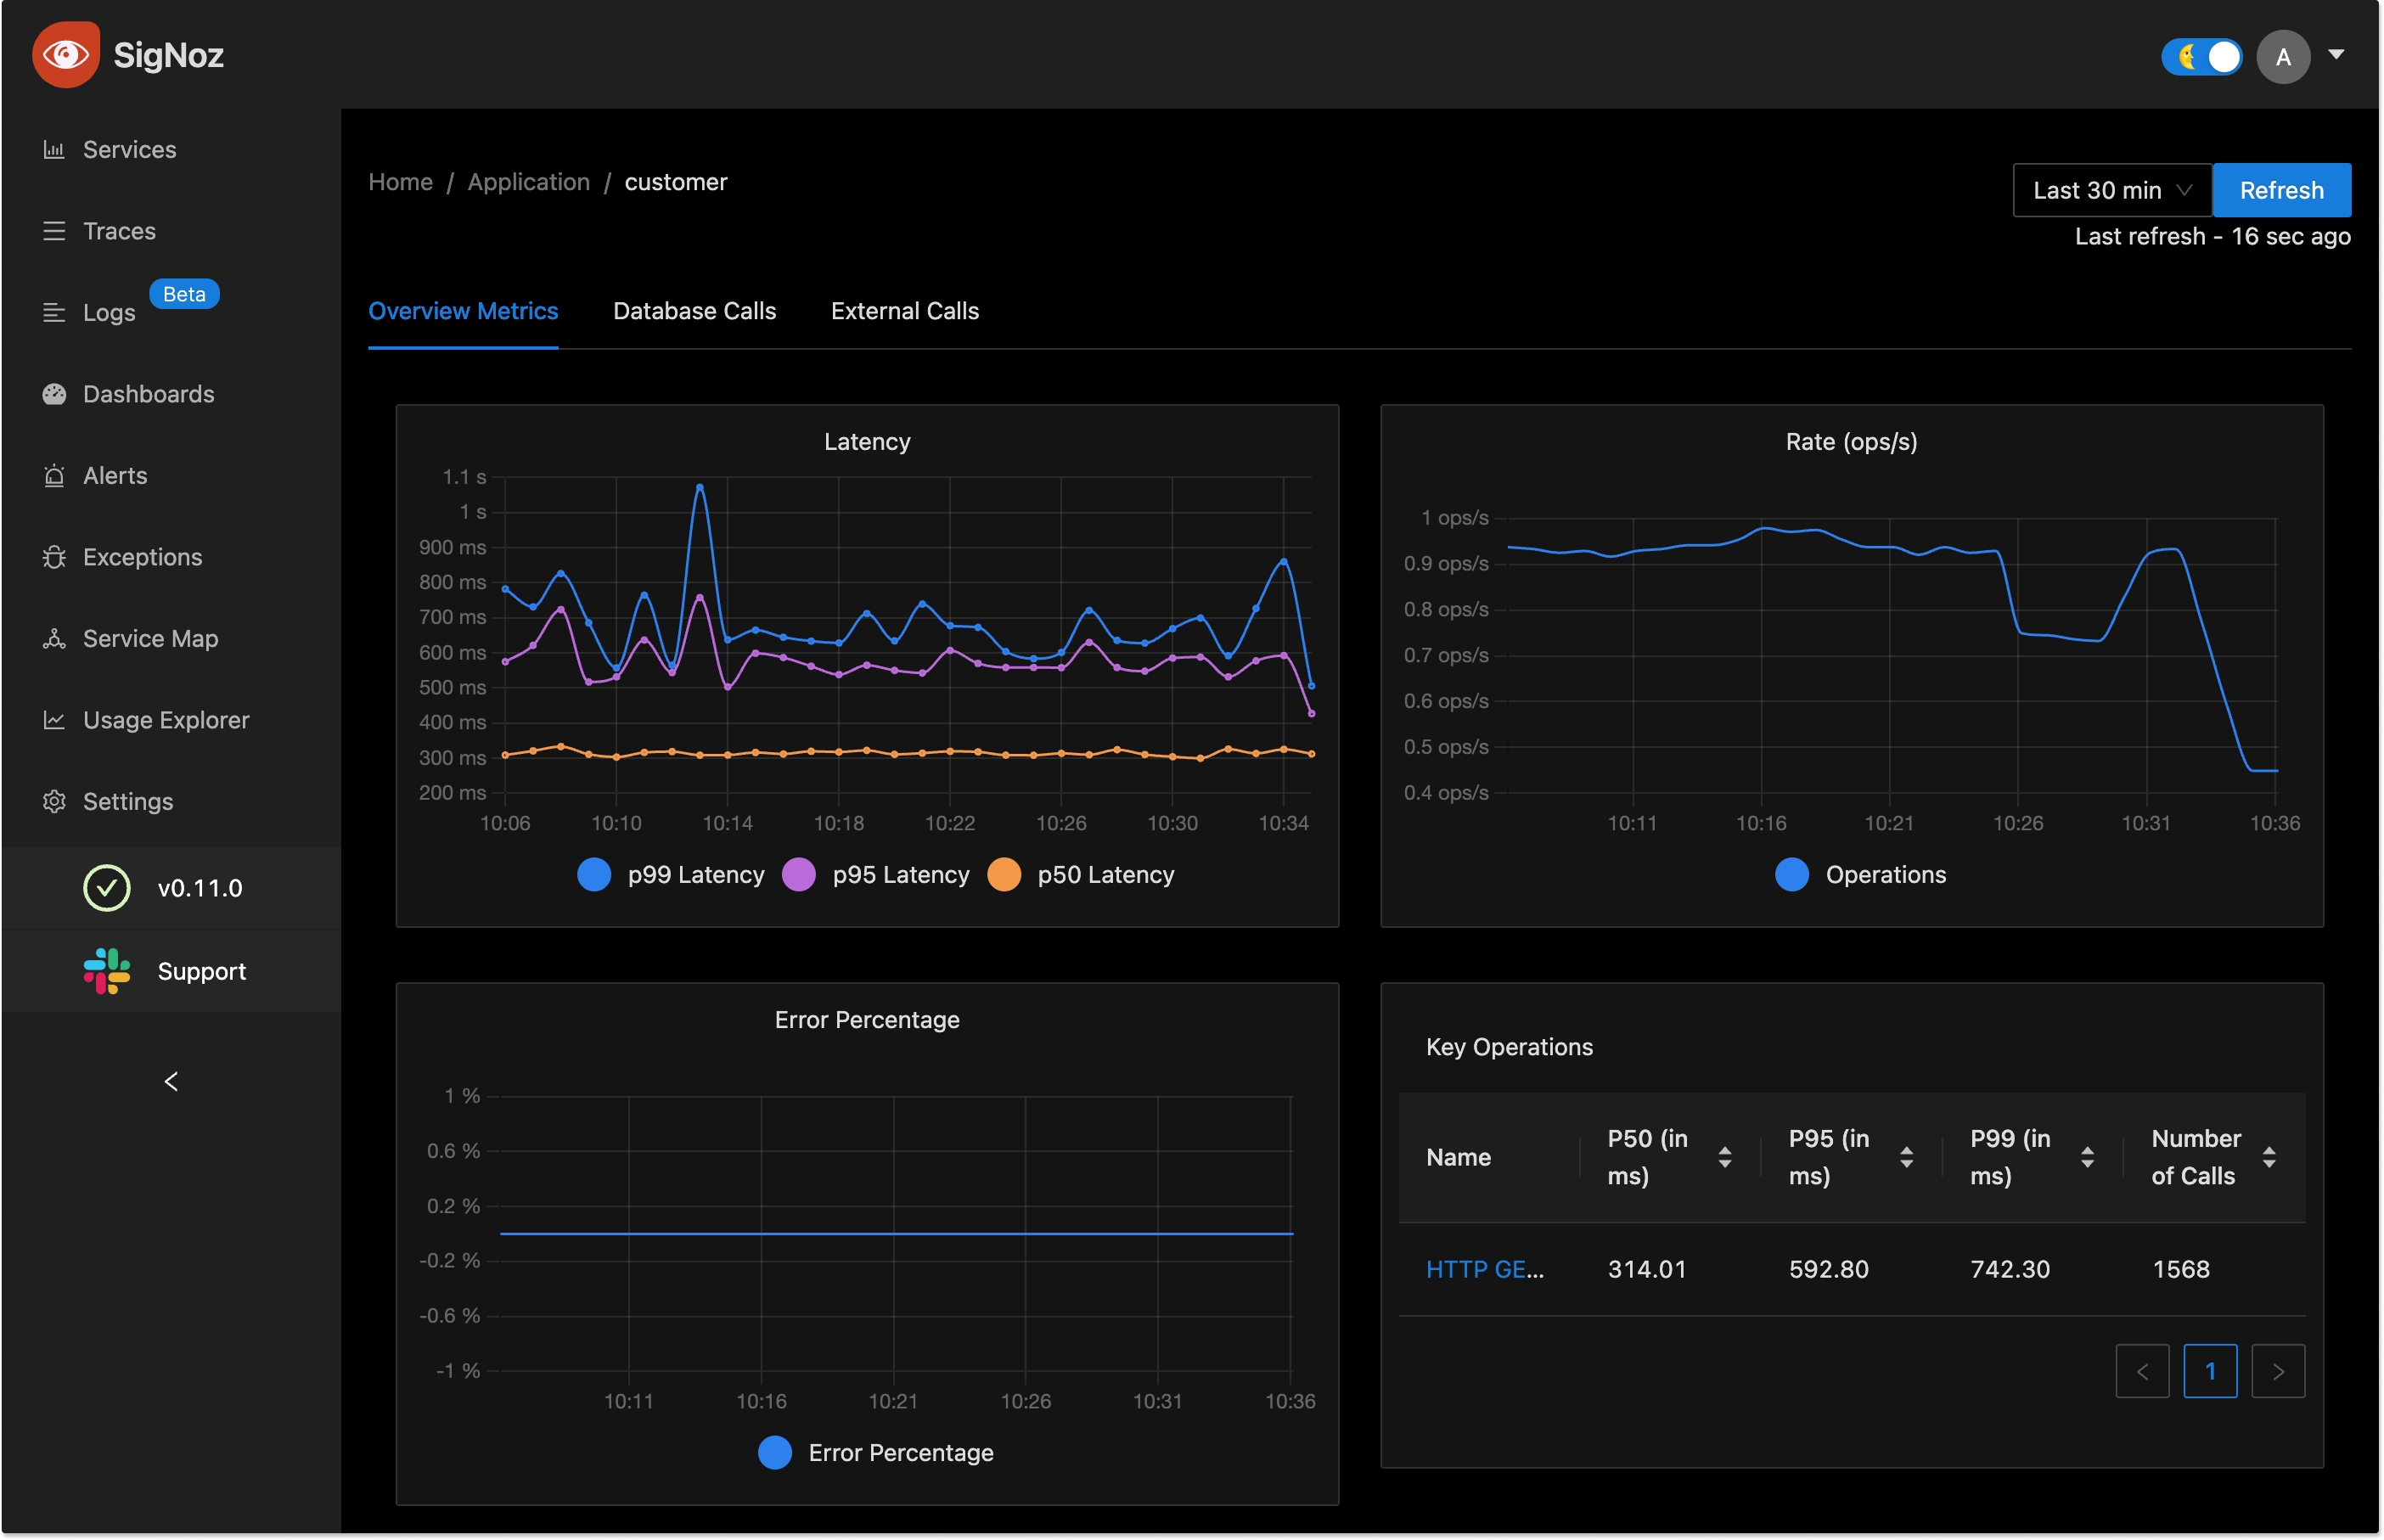 SigNoz dashboard showing the popular RED metrics for application performance monitoring